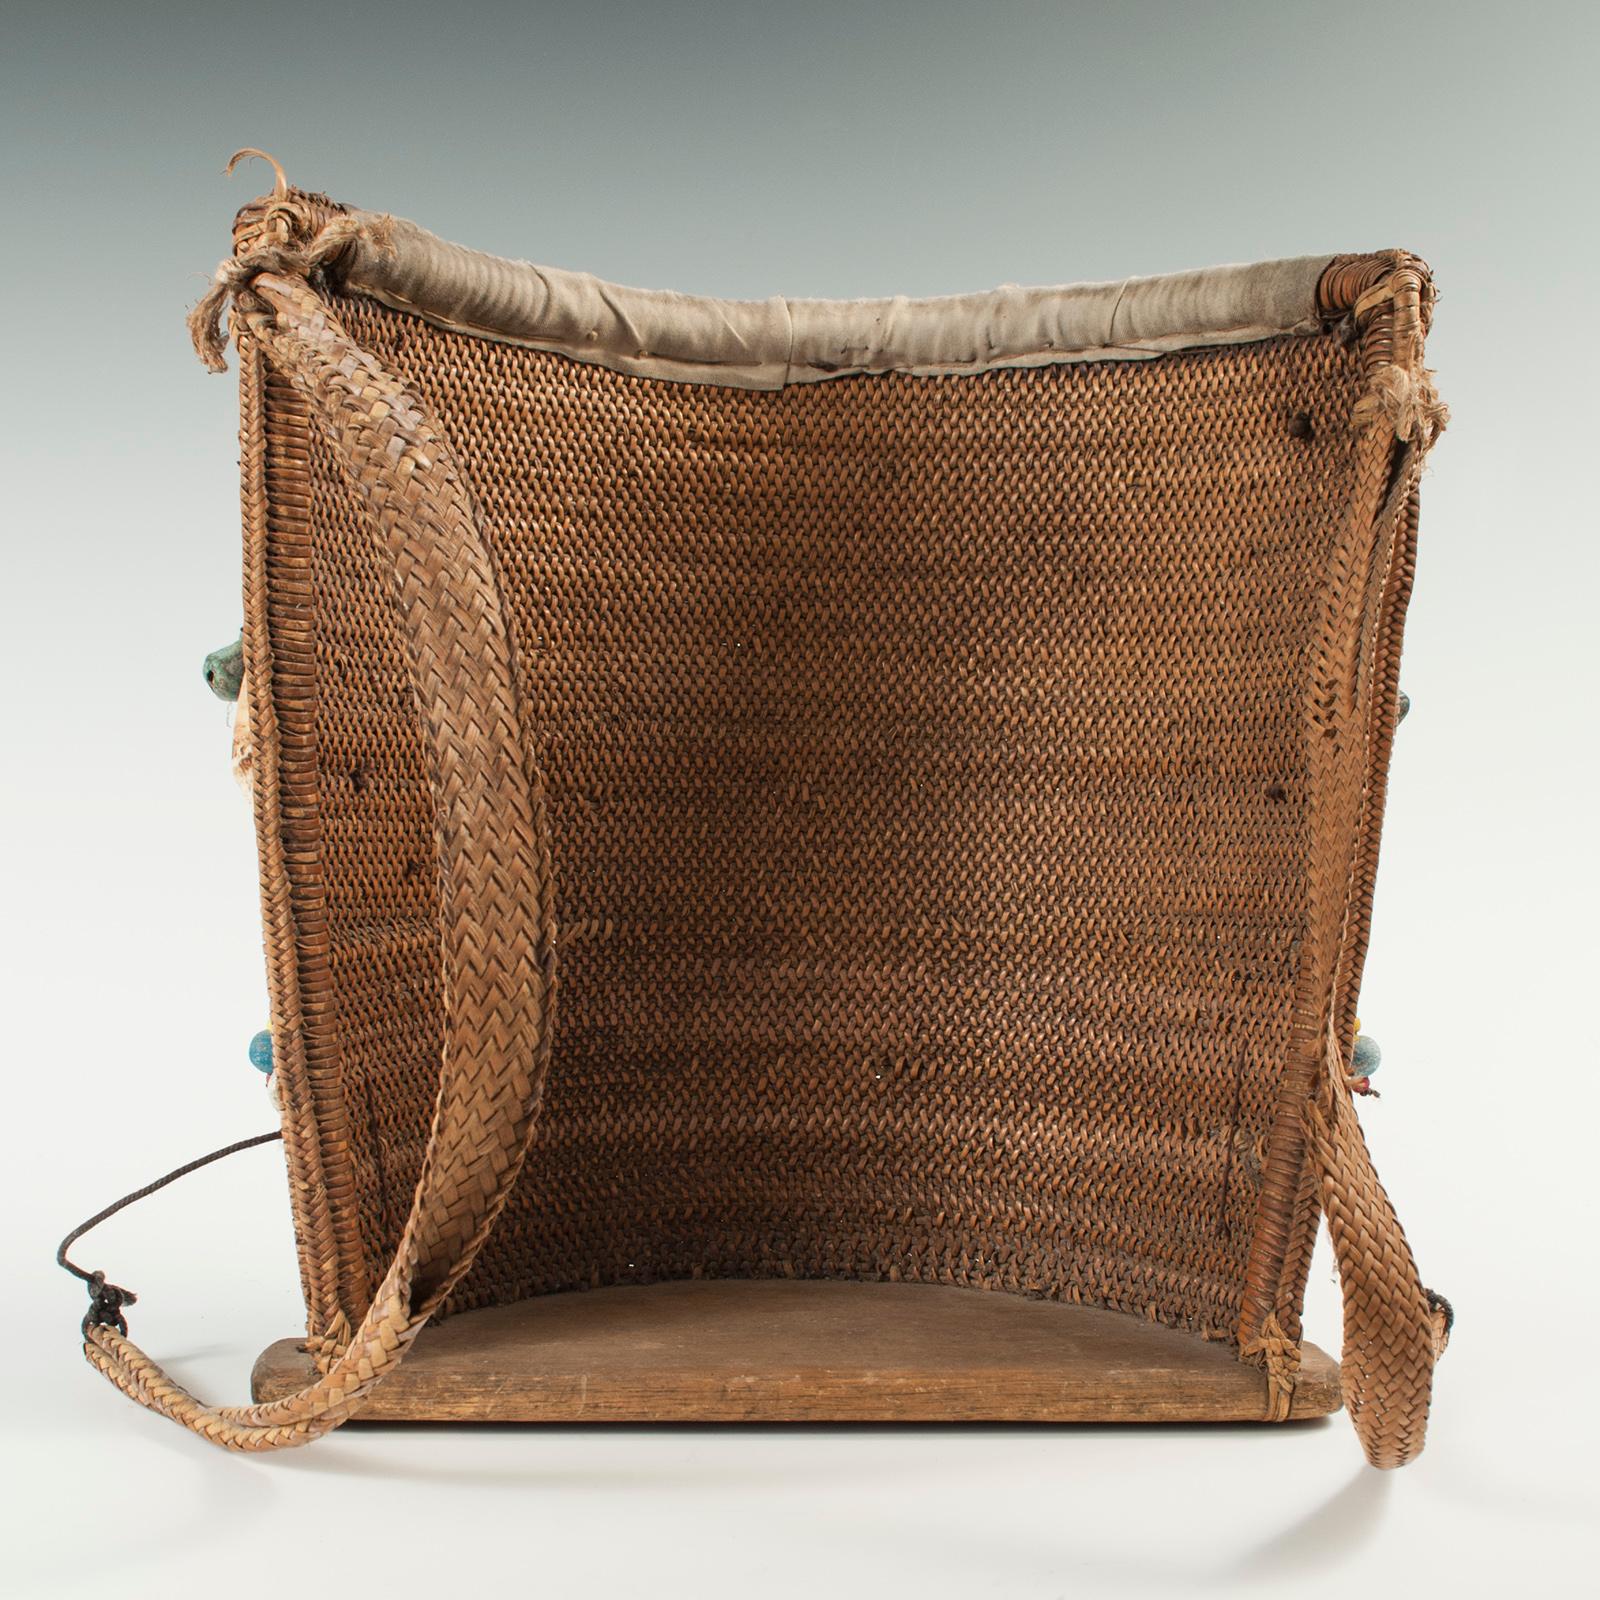 Hand-Crafted Mid-20th Century Dayak Tribal Baby Carrier, Kalimantan, Borneo